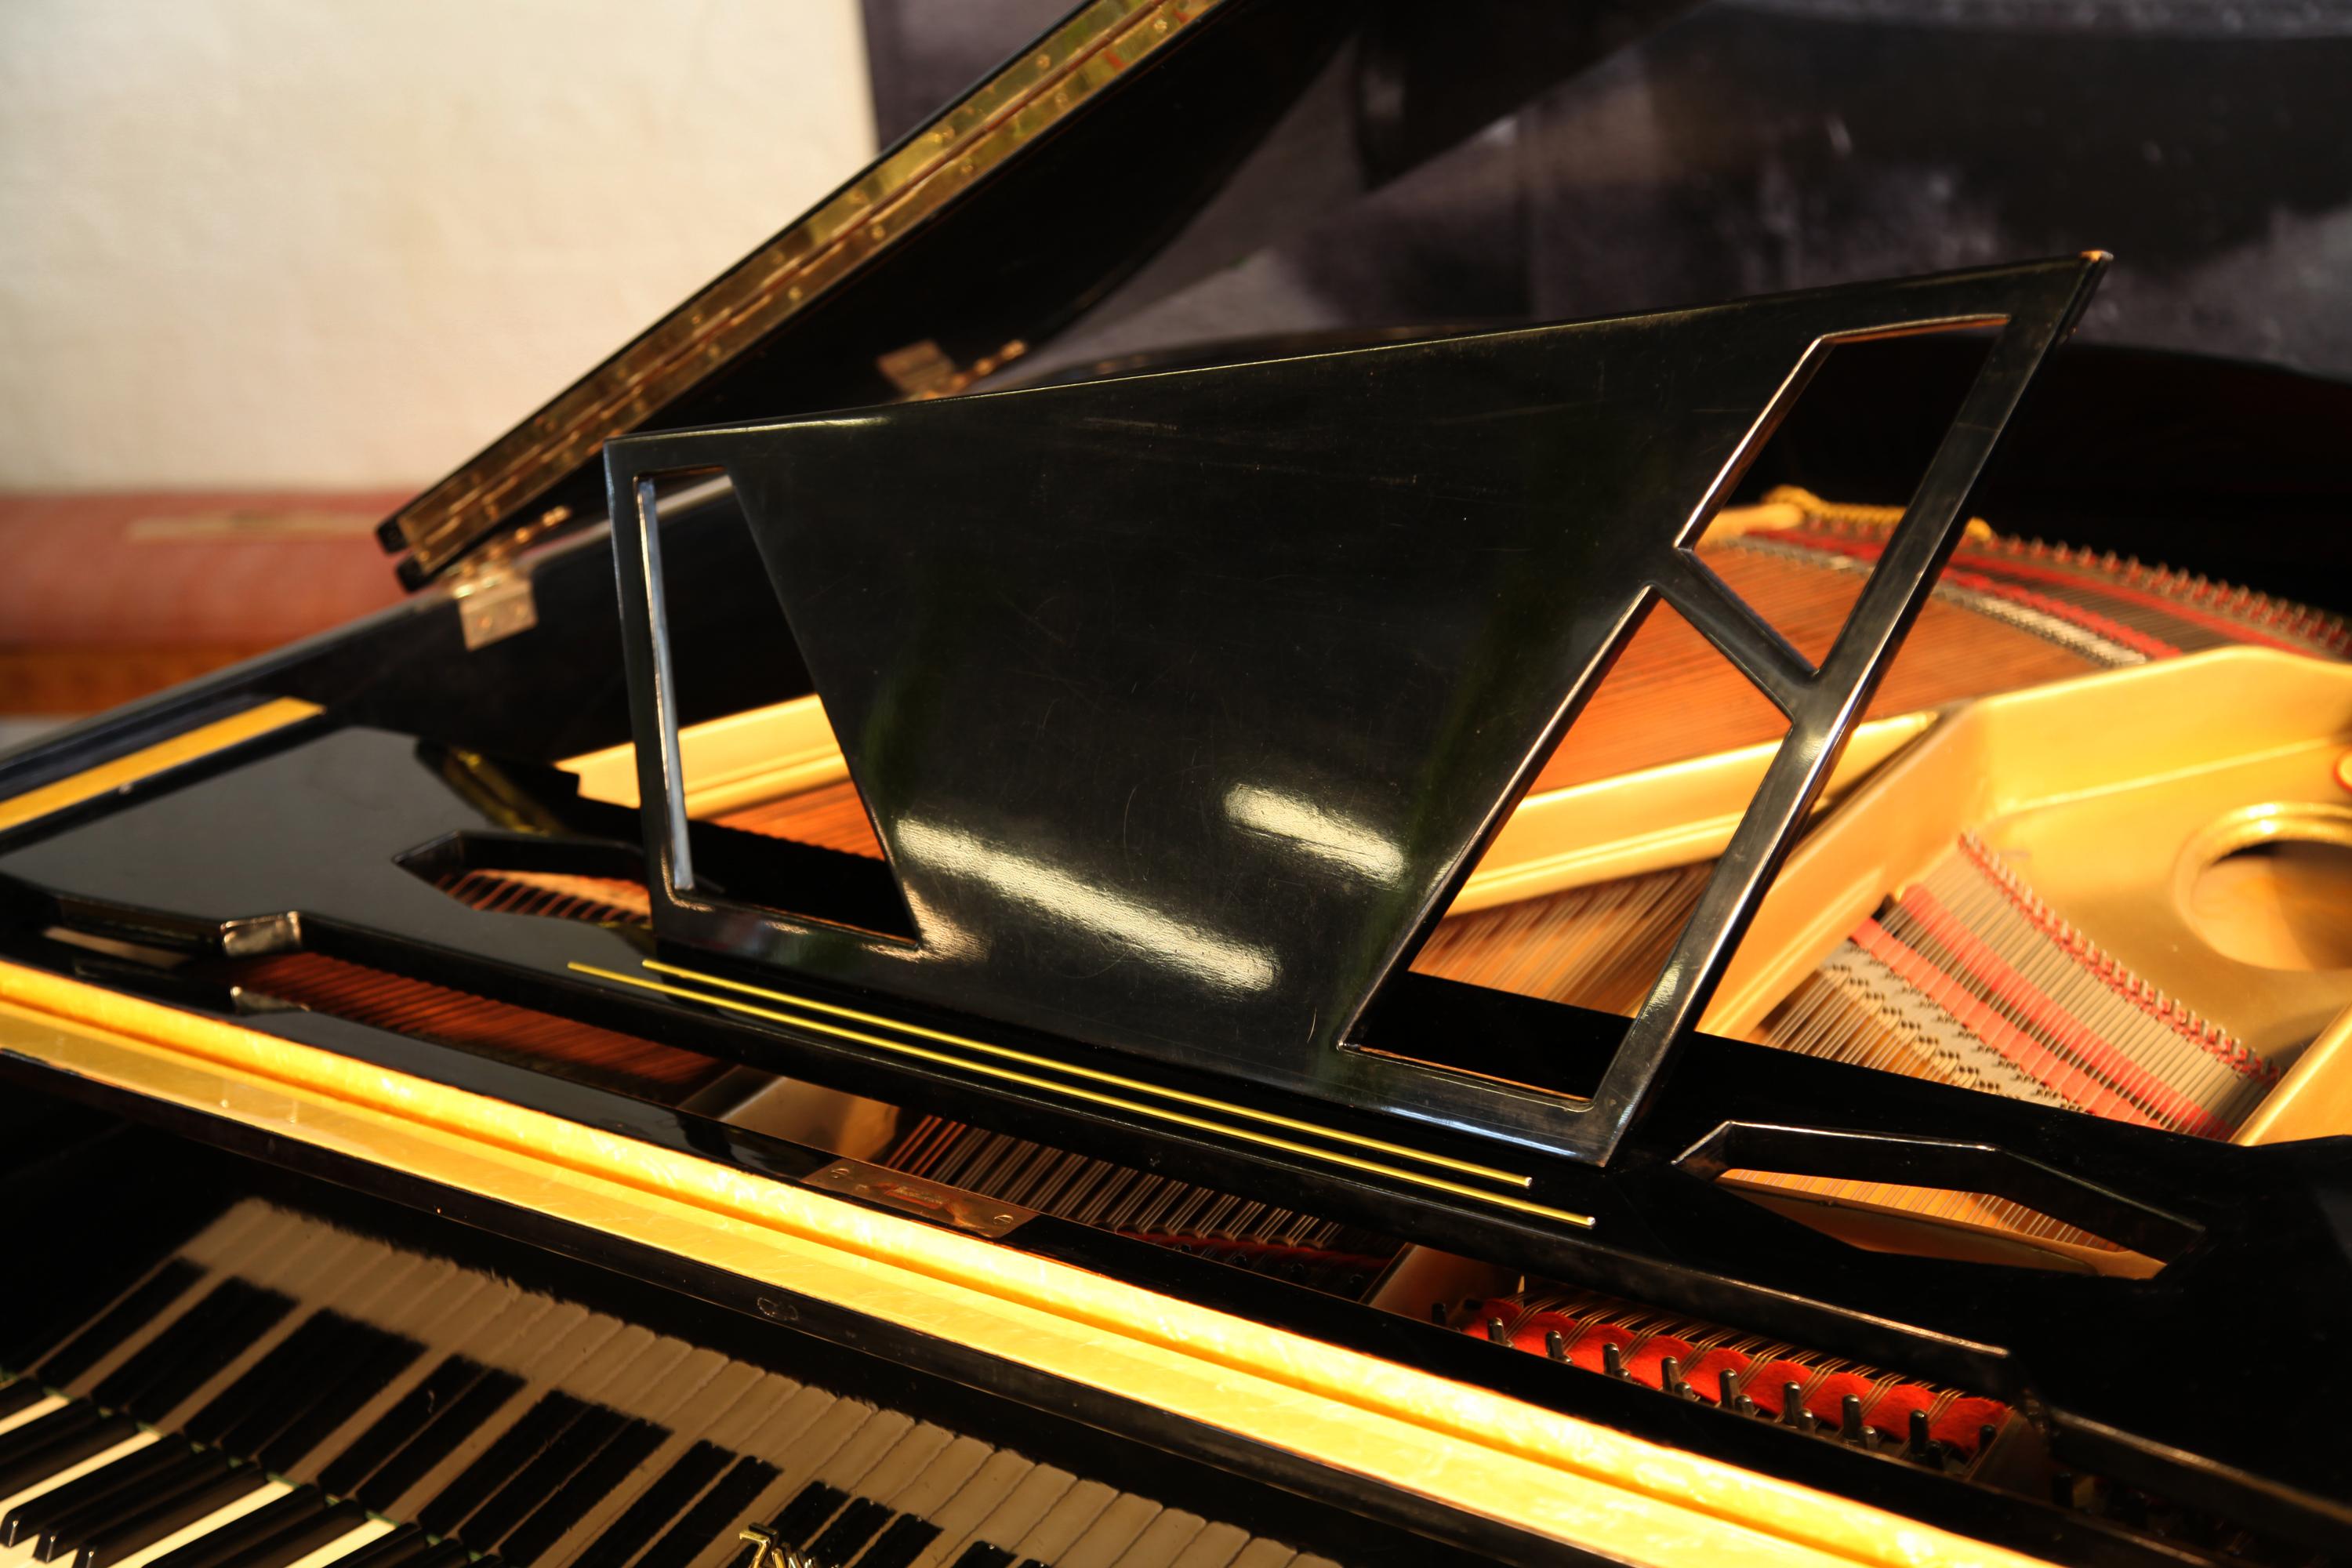 A 1950s style, Zimmermann baby grand piano with a contrasting black and yellow formica case. Piano features an asymmetrical music desk with geometric cut-outs. 
Angular styling is seen throughout the cabinet design. The tapered geometric legs are